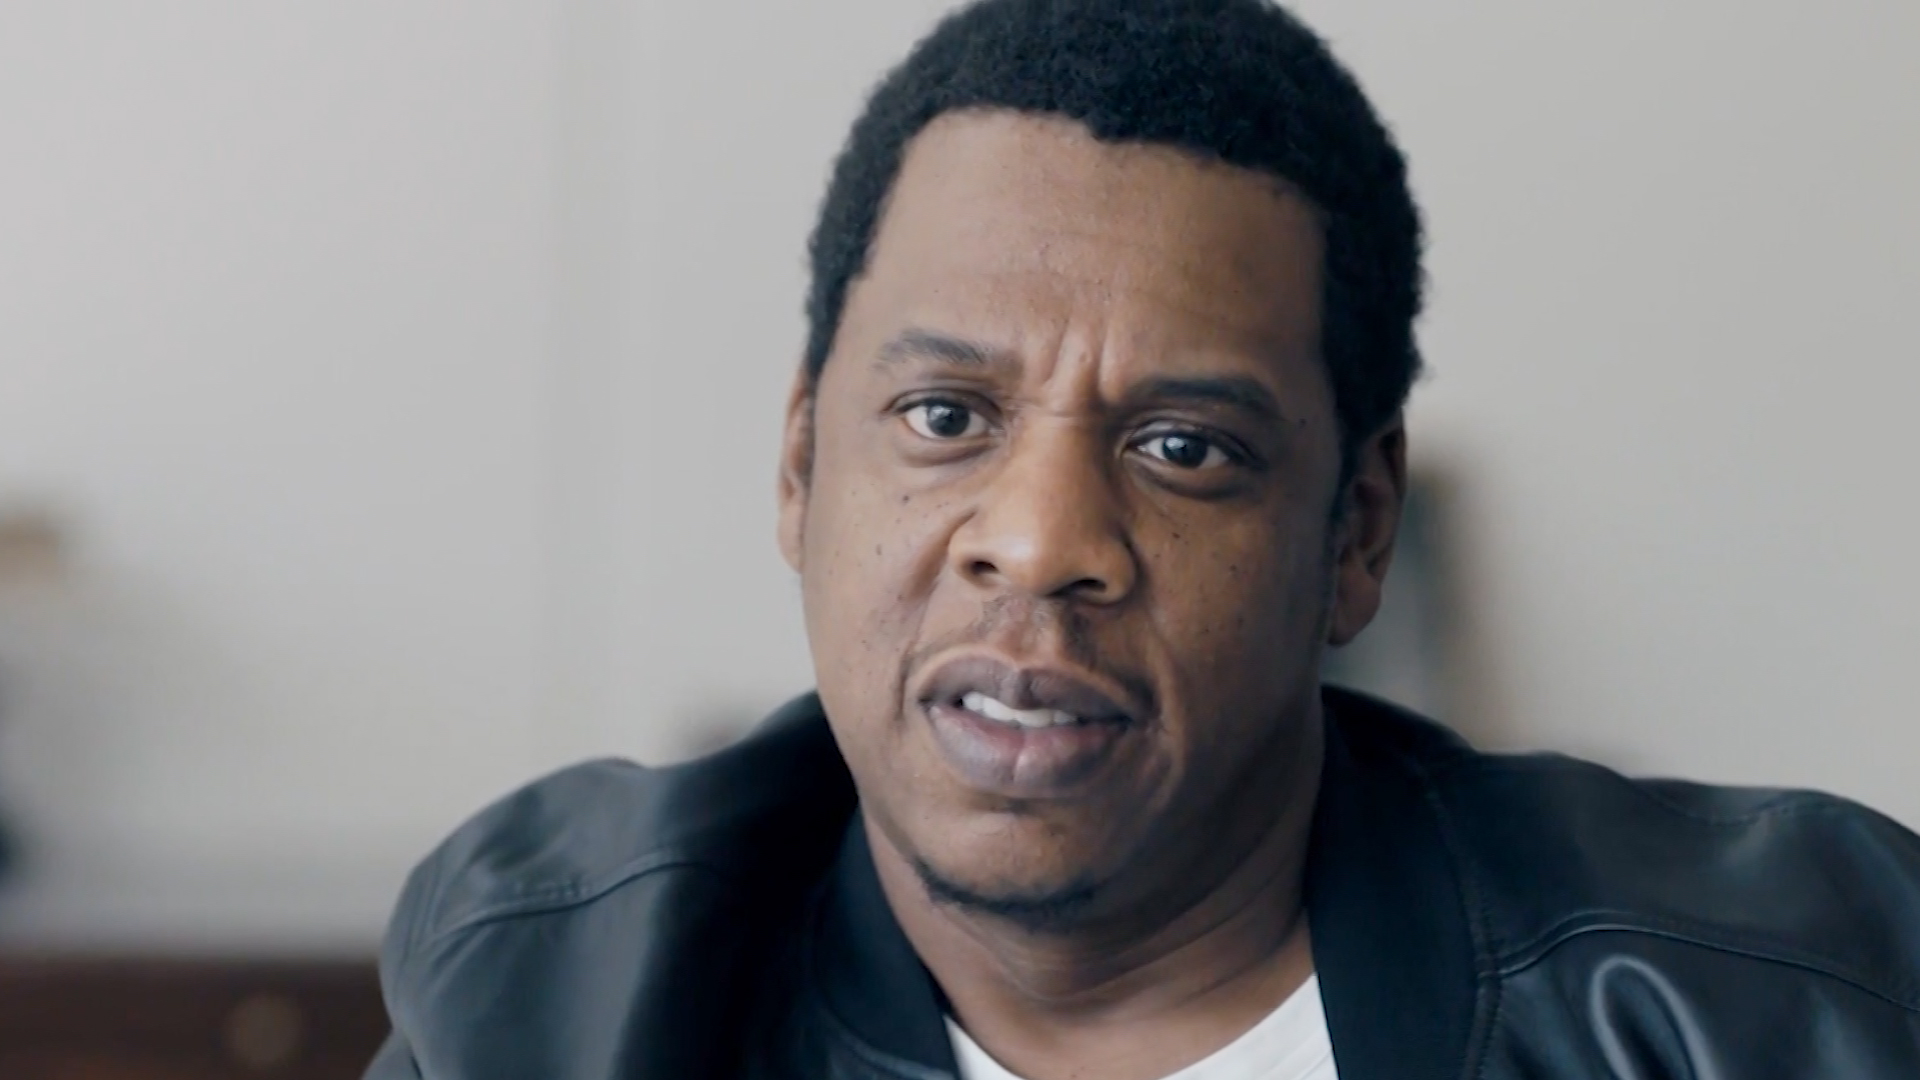 jay z on to the next one official video